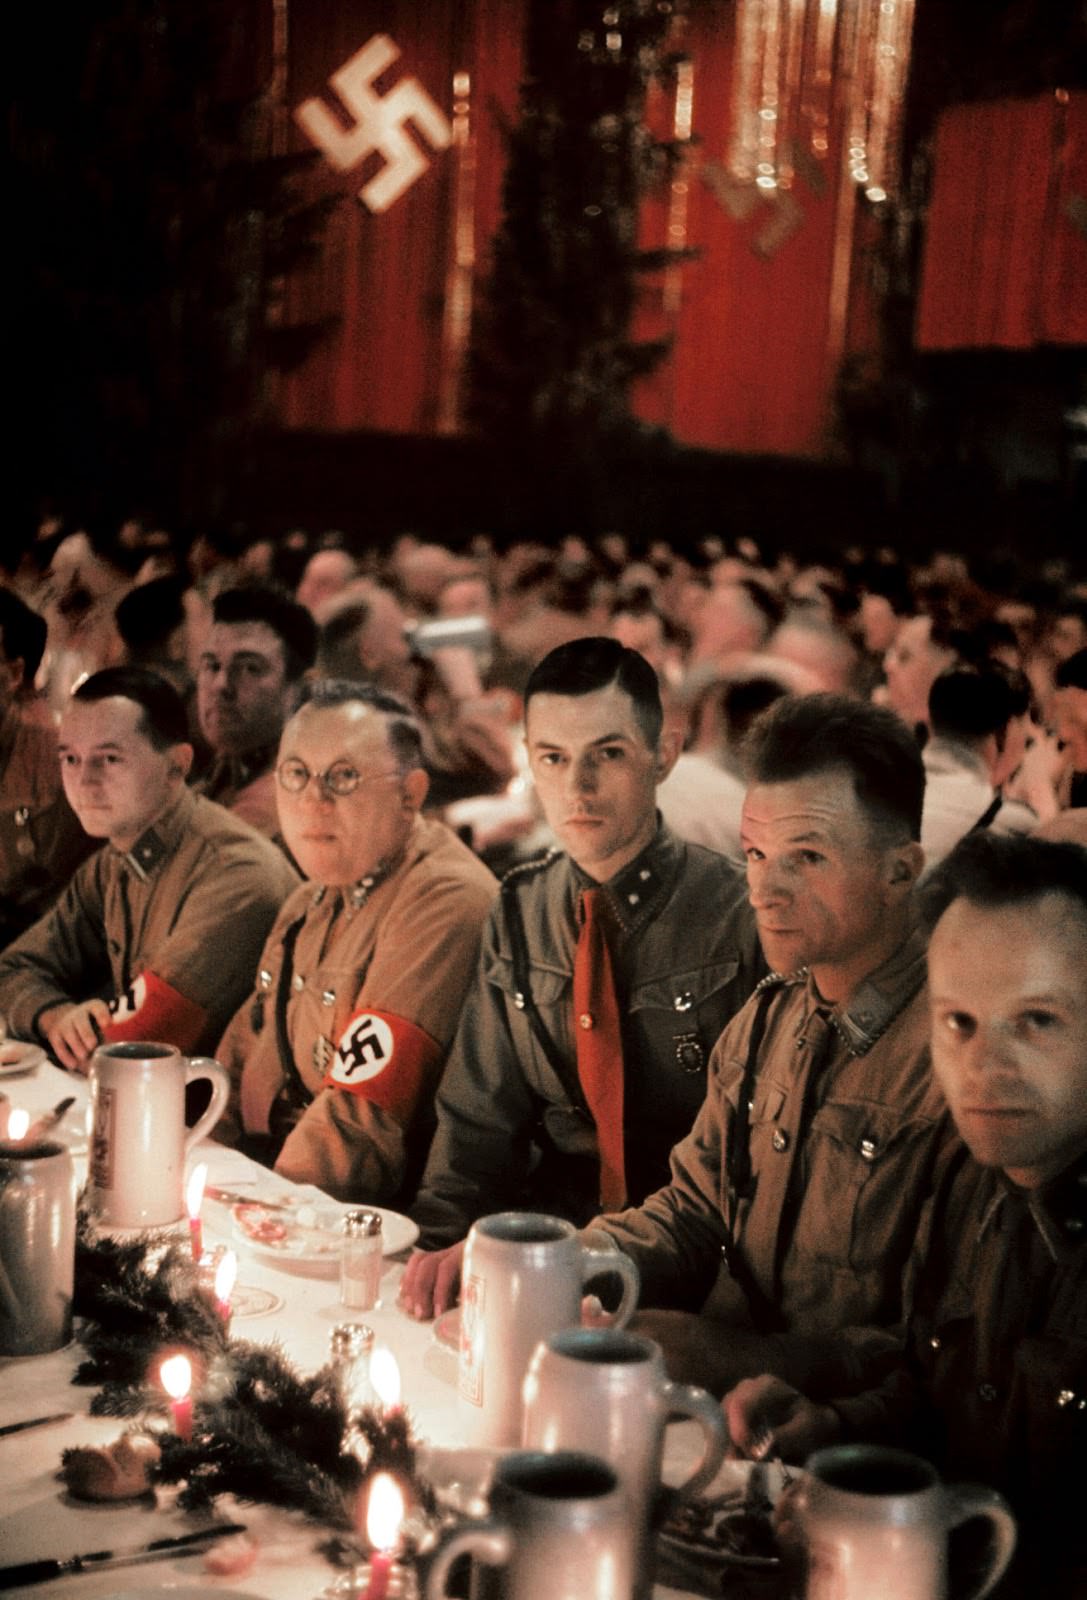 Group of underlings have a similarly stiff attitude at the Christmas party held on December 18, 1941 at a Munich beer house.